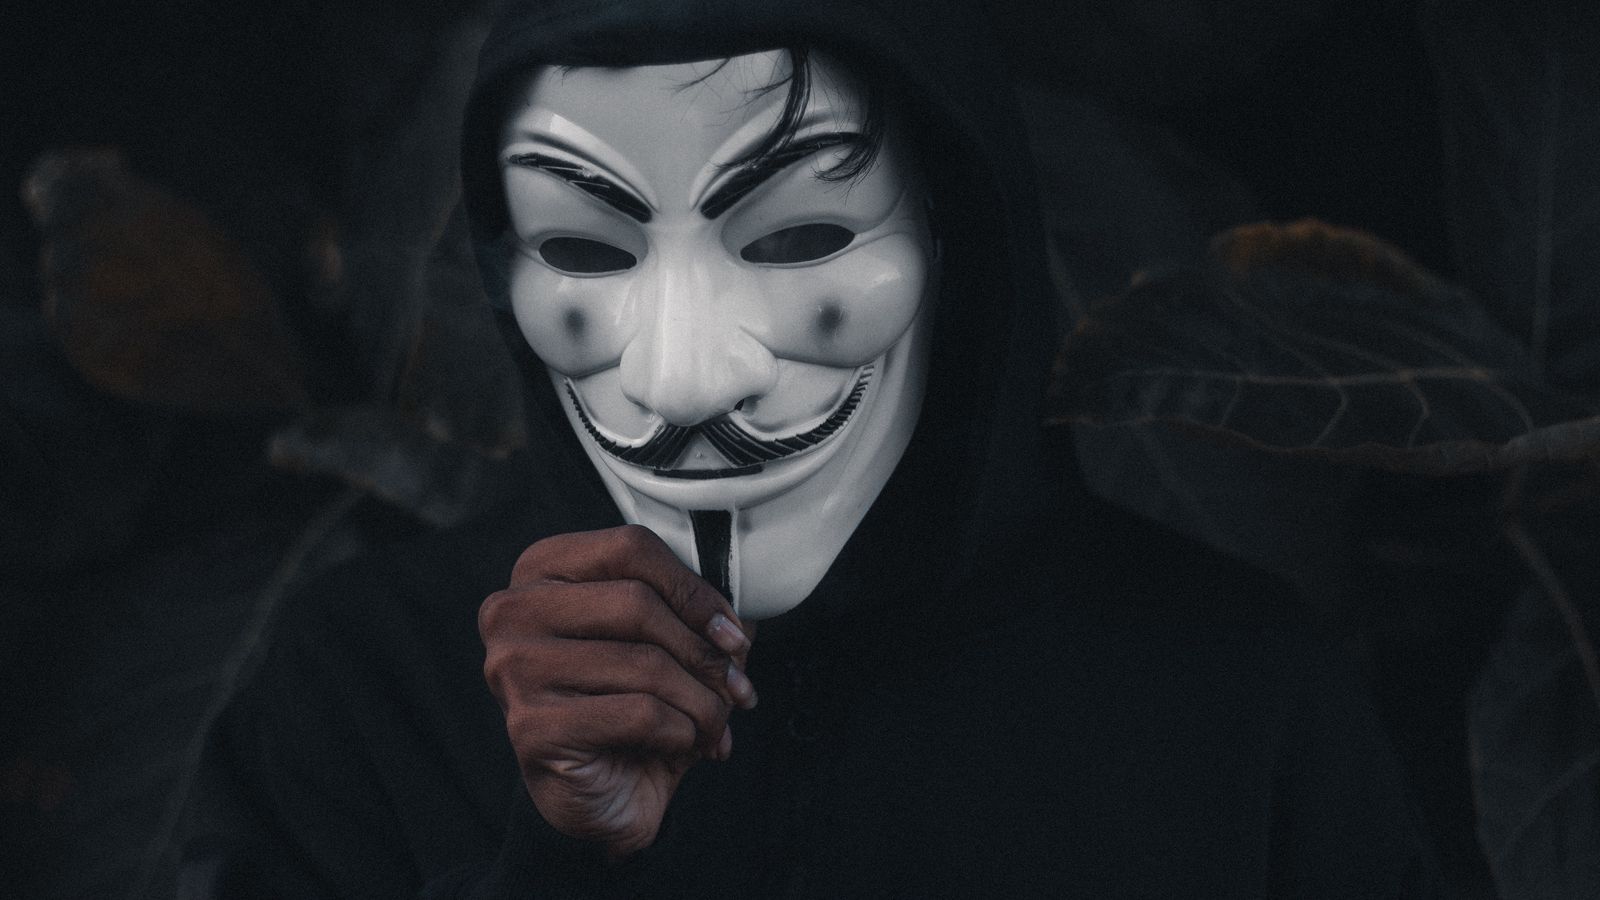 Download wallpaper 1600x900 mask, person, anonymous widescreen 16:9 hd  background